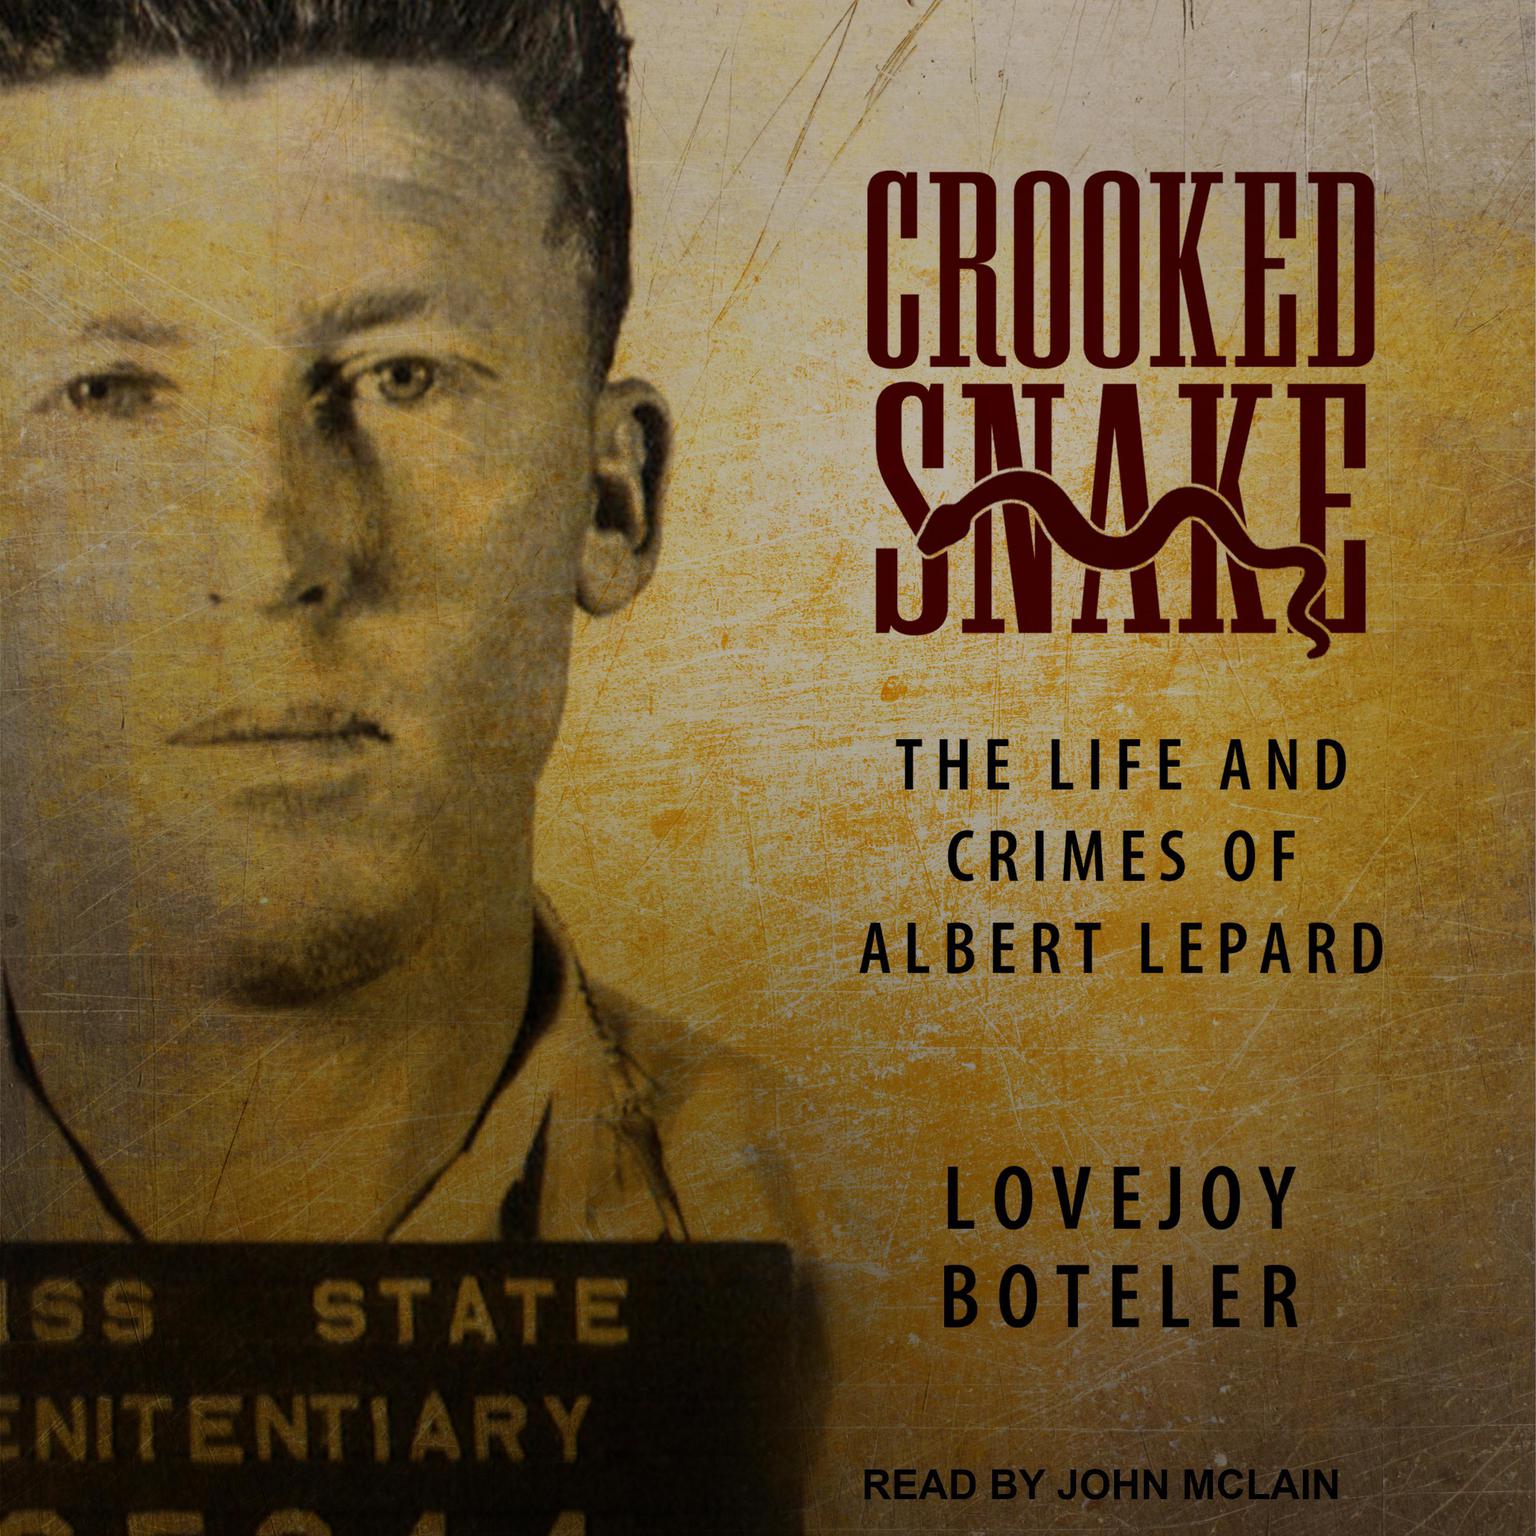 Crooked Snake: The Life and Crimes of Albert Lepard Audiobook, by Lovejoy Boteler